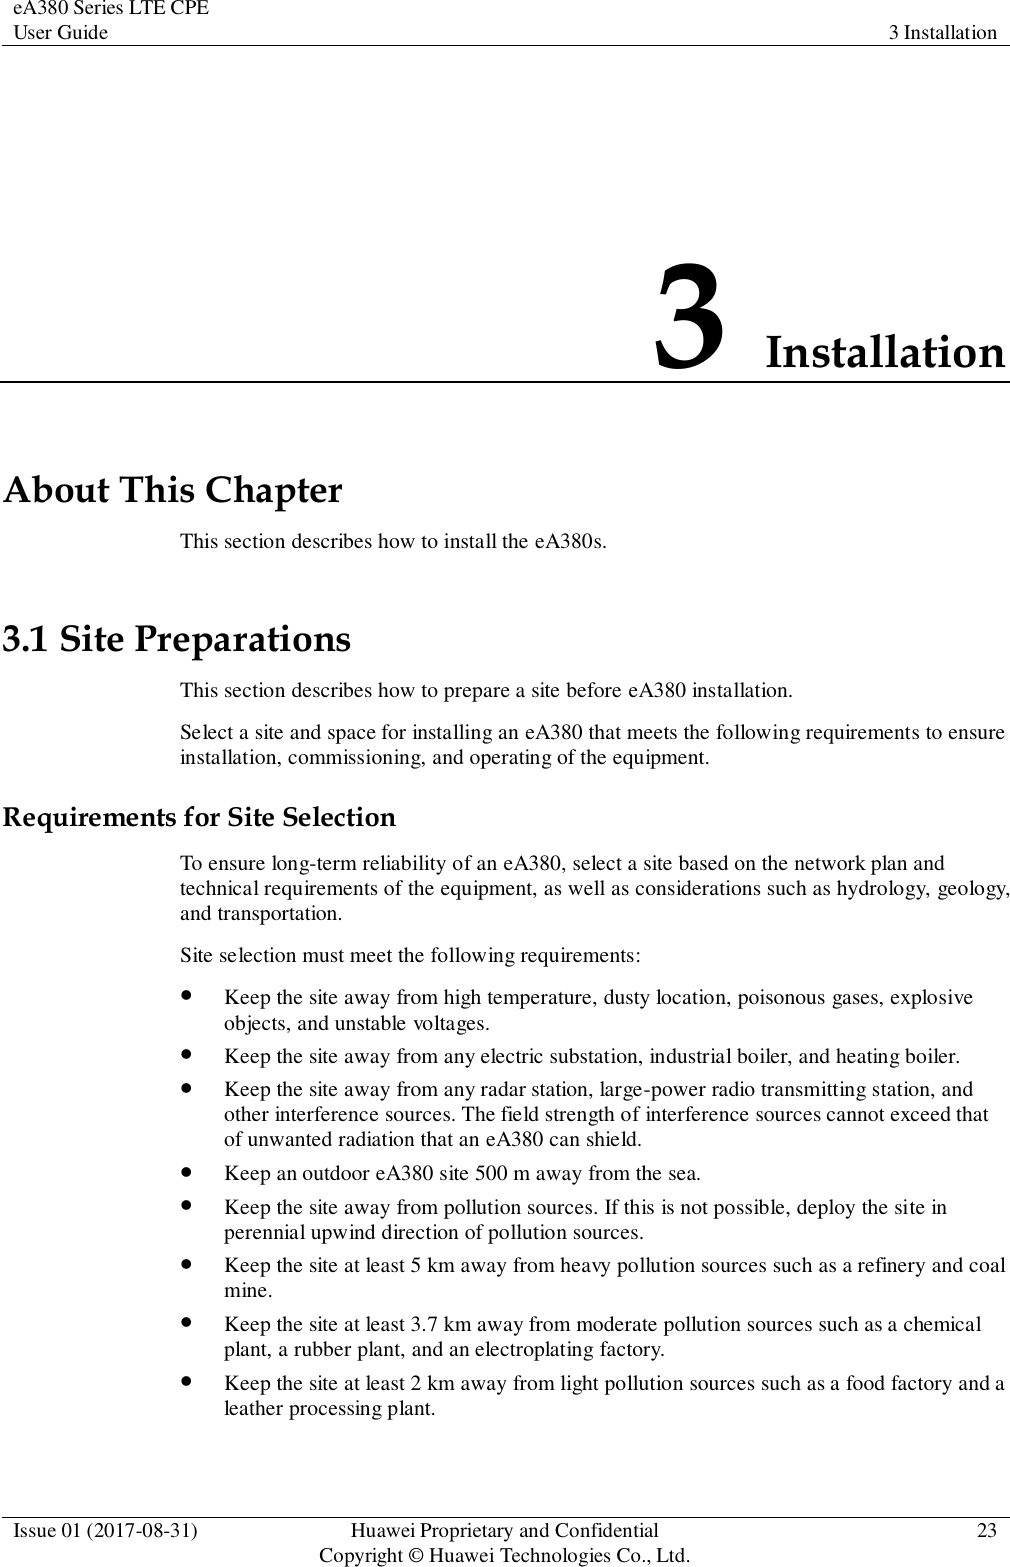 eA380 Series LTE CPE User Guide 3 Installation  Issue 01 (2017-08-31) Huawei Proprietary and Confidential                                     Copyright © Huawei Technologies Co., Ltd. 23  3 Installation About This Chapter This section describes how to install the eA380s. 3.1 Site Preparations This section describes how to prepare a site before eA380 installation. Select a site and space for installing an eA380 that meets the following requirements to ensure installation, commissioning, and operating of the equipment.   Requirements for Site Selection To ensure long-term reliability of an eA380, select a site based on the network plan and technical requirements of the equipment, as well as considerations such as hydrology, geology, and transportation. Site selection must meet the following requirements:  Keep the site away from high temperature, dusty location, poisonous gases, explosive objects, and unstable voltages.    Keep the site away from any electric substation, industrial boiler, and heating boiler.    Keep the site away from any radar station, large-power radio transmitting station, and other interference sources. The field strength of interference sources cannot exceed that of unwanted radiation that an eA380 can shield.    Keep an outdoor eA380 site 500 m away from the sea.    Keep the site away from pollution sources. If this is not possible, deploy the site in perennial upwind direction of pollution sources.    Keep the site at least 5 km away from heavy pollution sources such as a refinery and coal mine.    Keep the site at least 3.7 km away from moderate pollution sources such as a chemical plant, a rubber plant, and an electroplating factory.    Keep the site at least 2 km away from light pollution sources such as a food factory and a leather processing plant.   